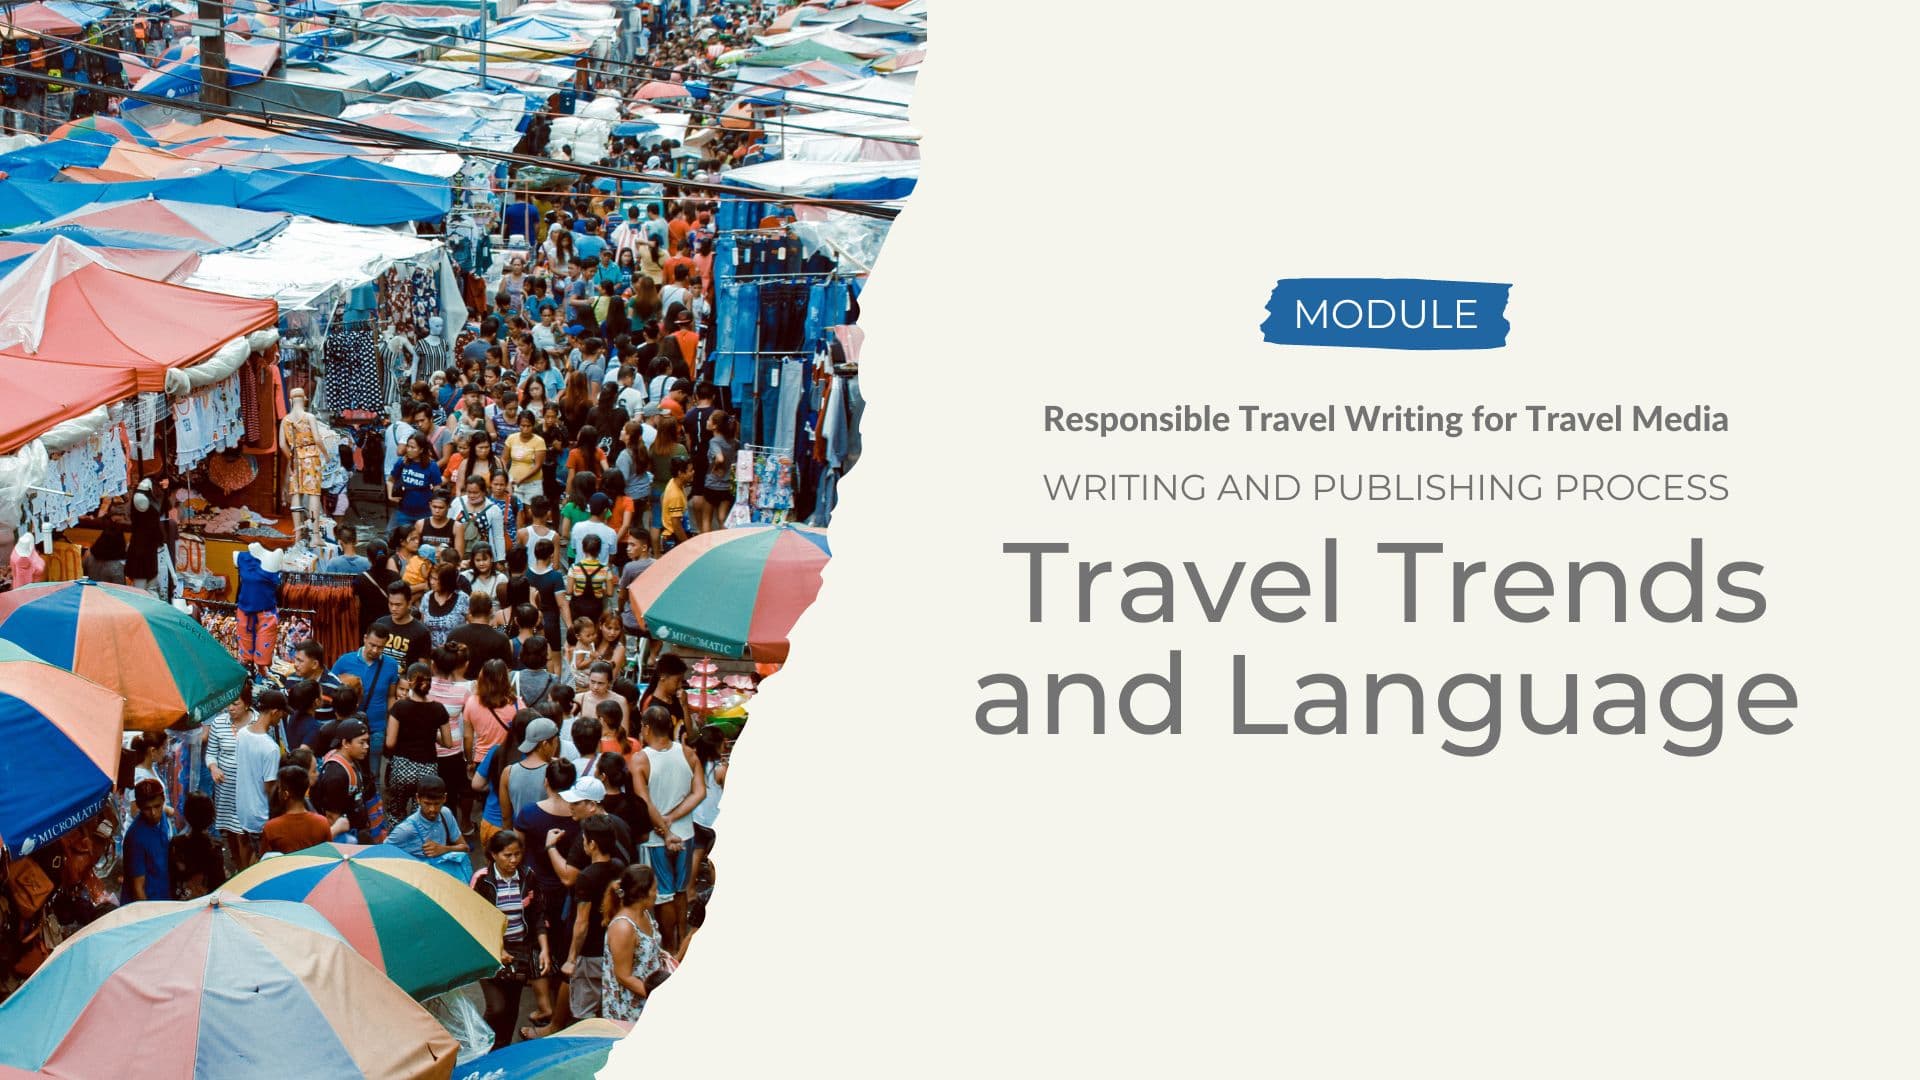 Writing and Publishing Process - Travel Trends and Language